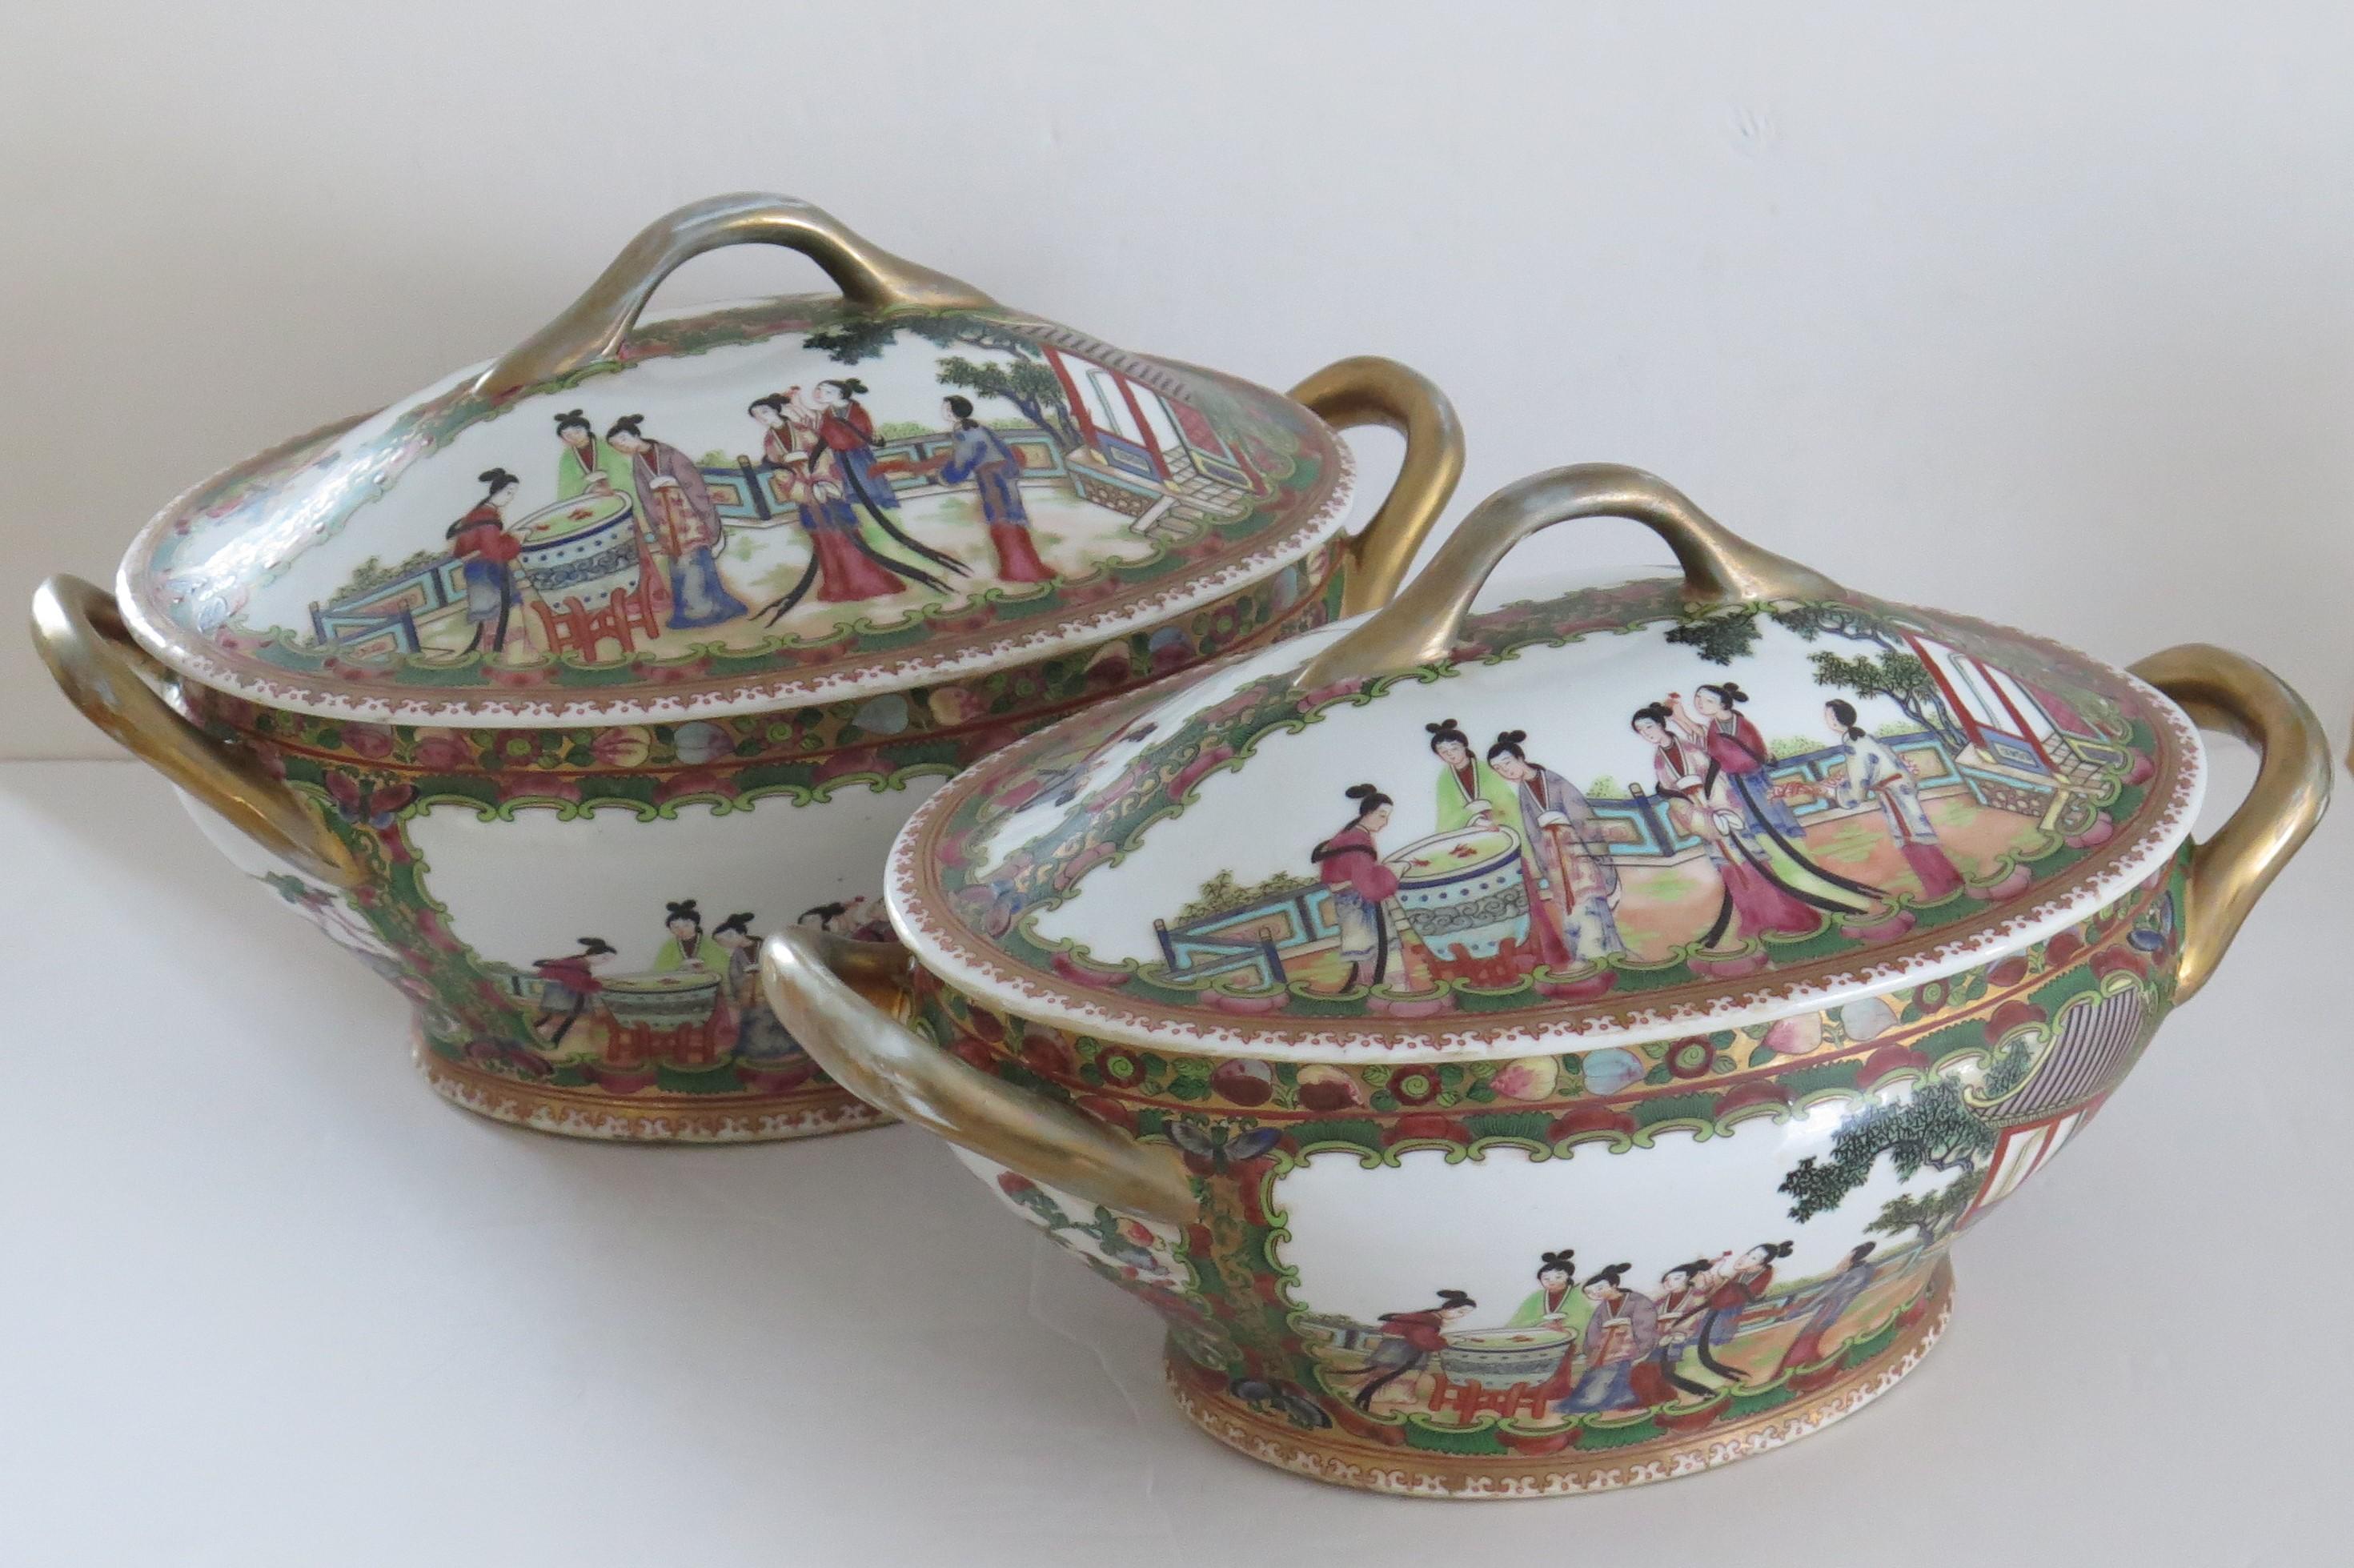 These are an outstanding PAIR of Chinese Export Porcelain Large Lidded Tureens, beautifully hand painted. 

These high quality Tureens are very finely hand painted in great detail. 

The patterns show groups of ladies in different outdoor scenes